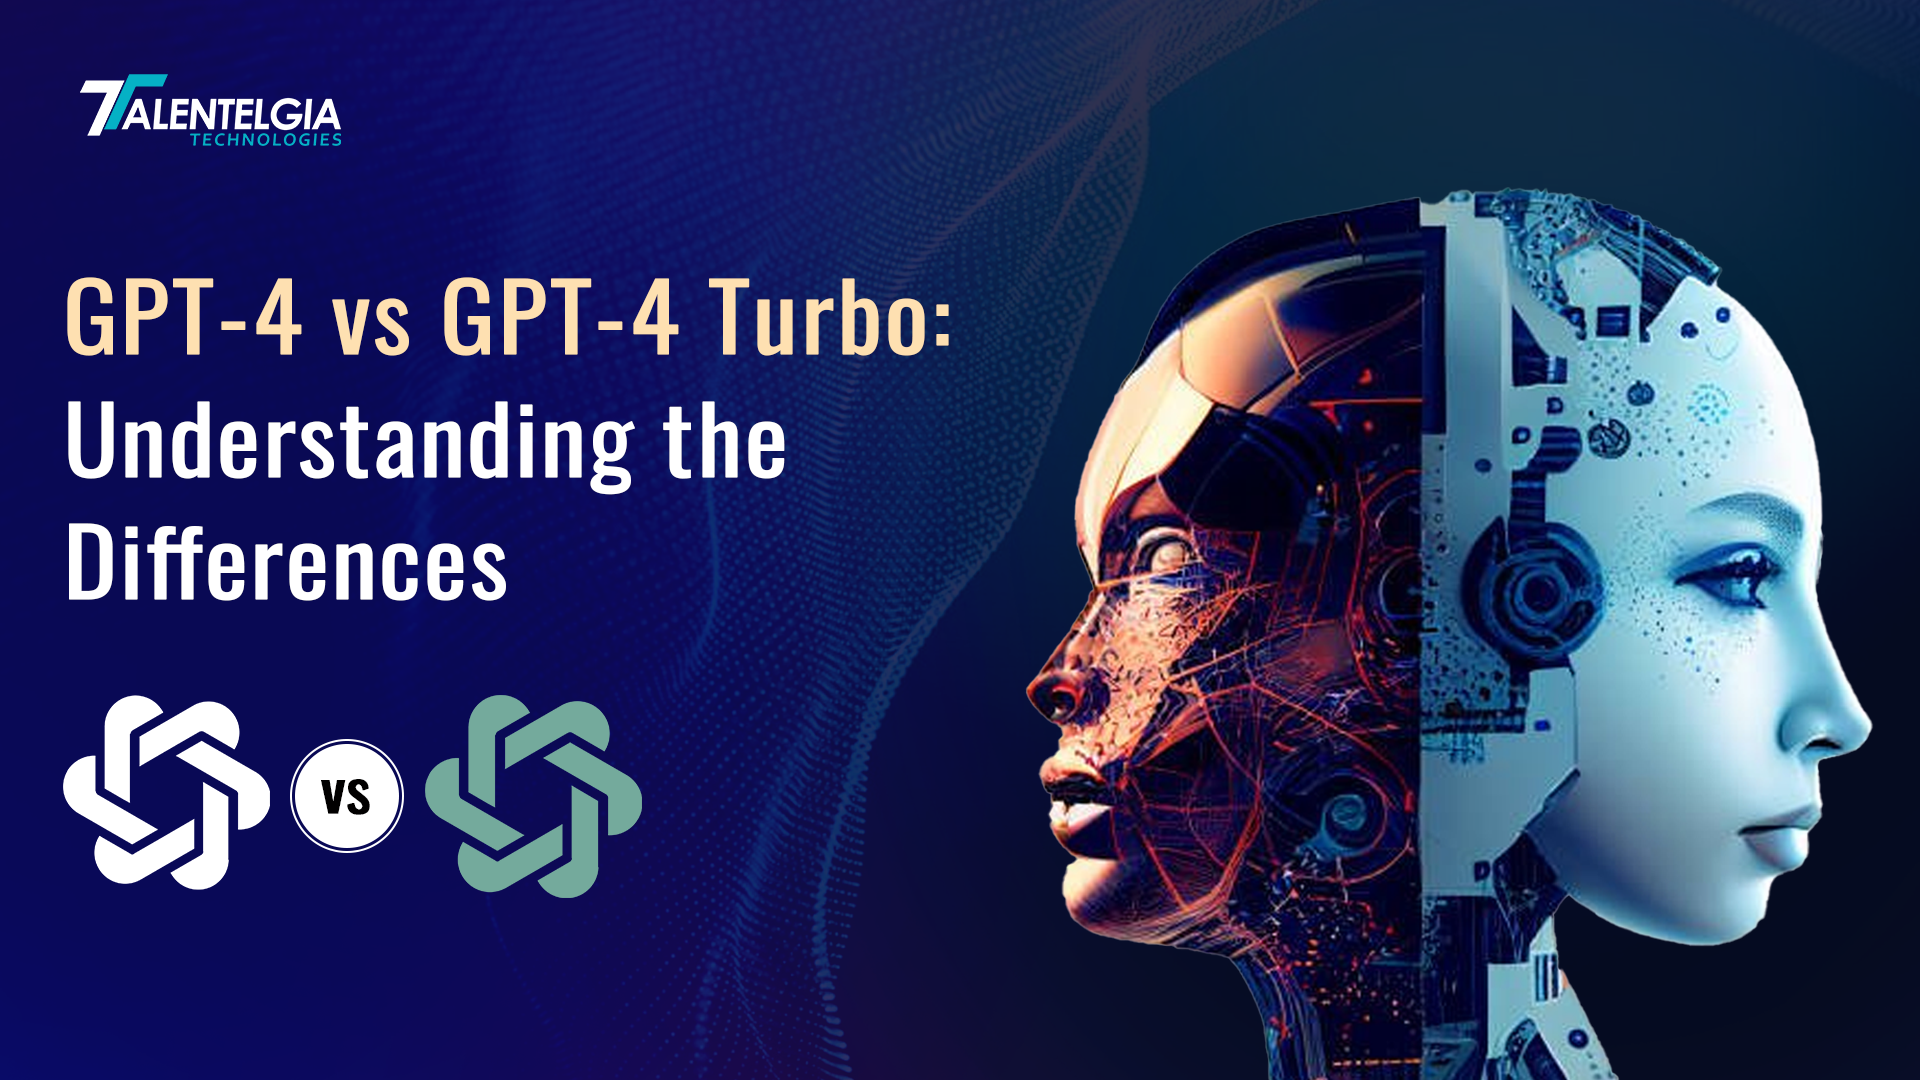 GPT-4 vs GPT-4 Turbo: What’s the Difference?